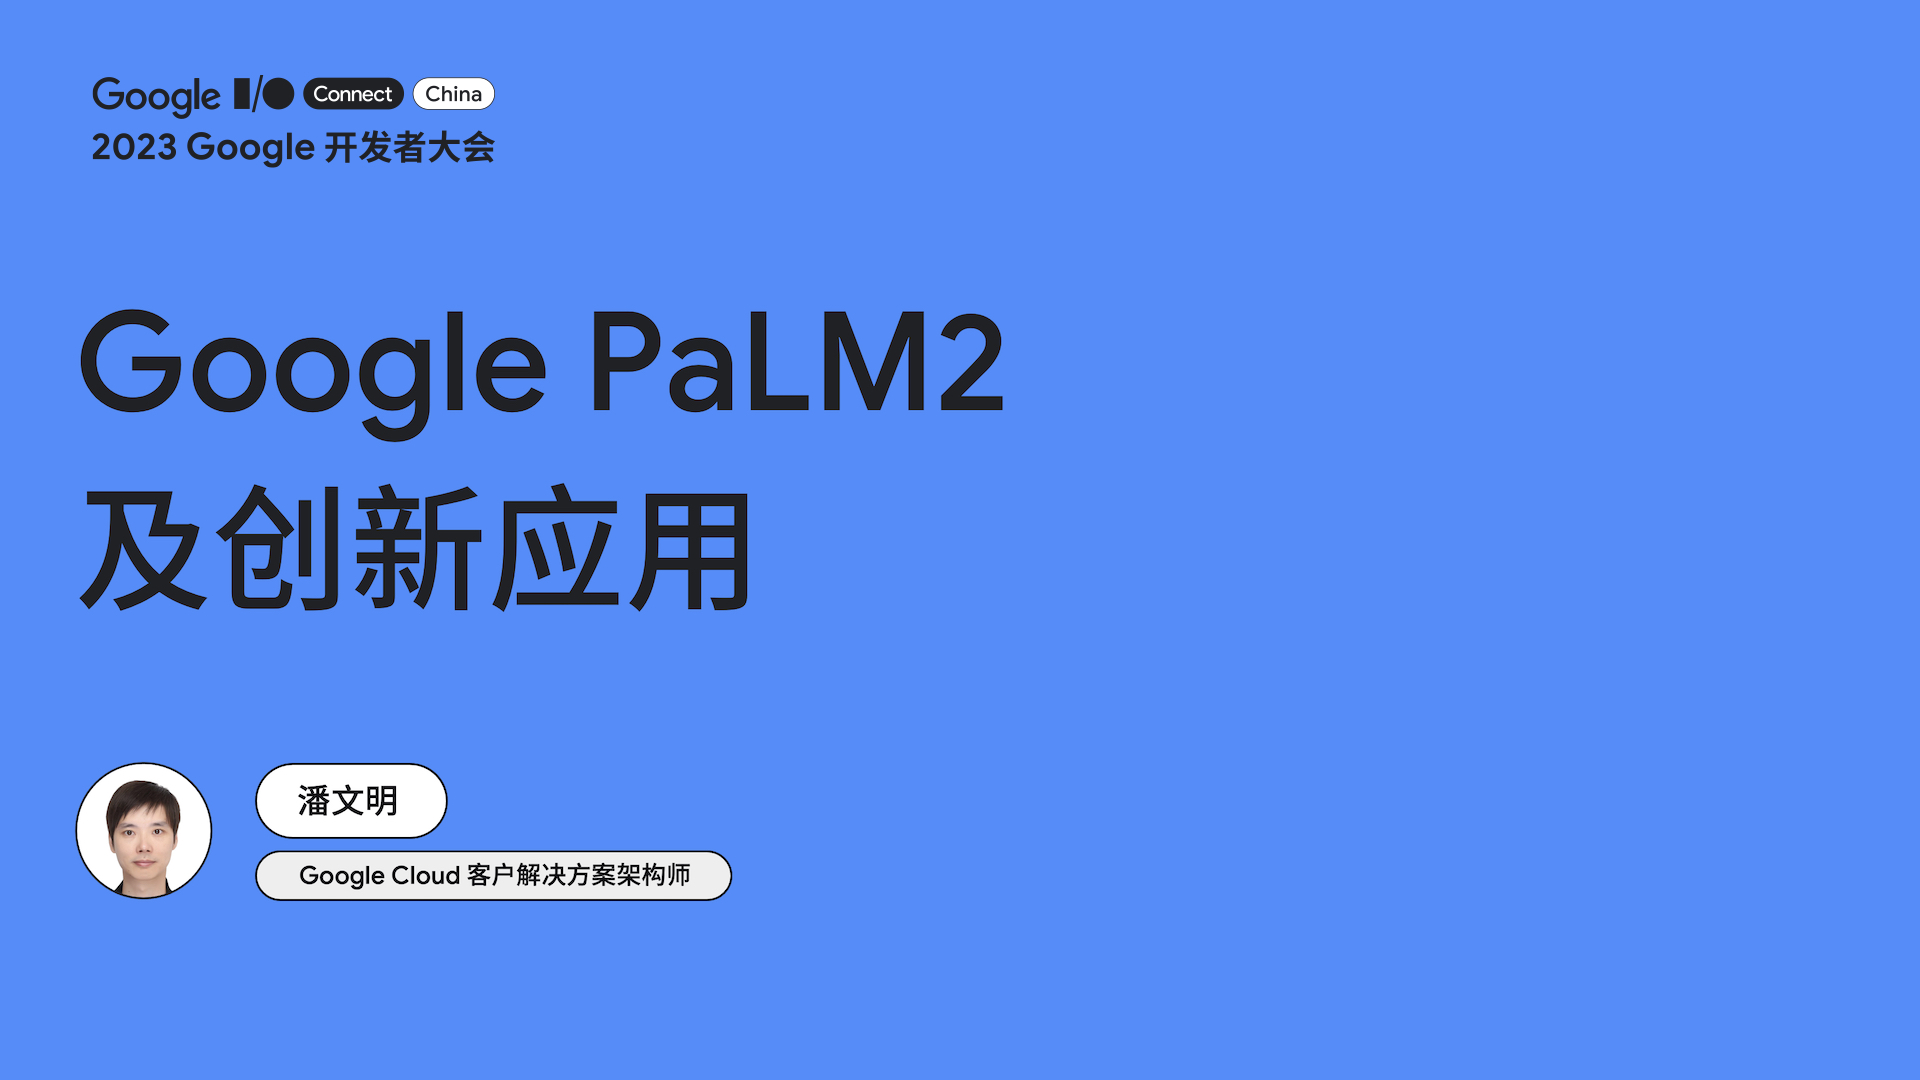  Google PaLM2 and innovative applications